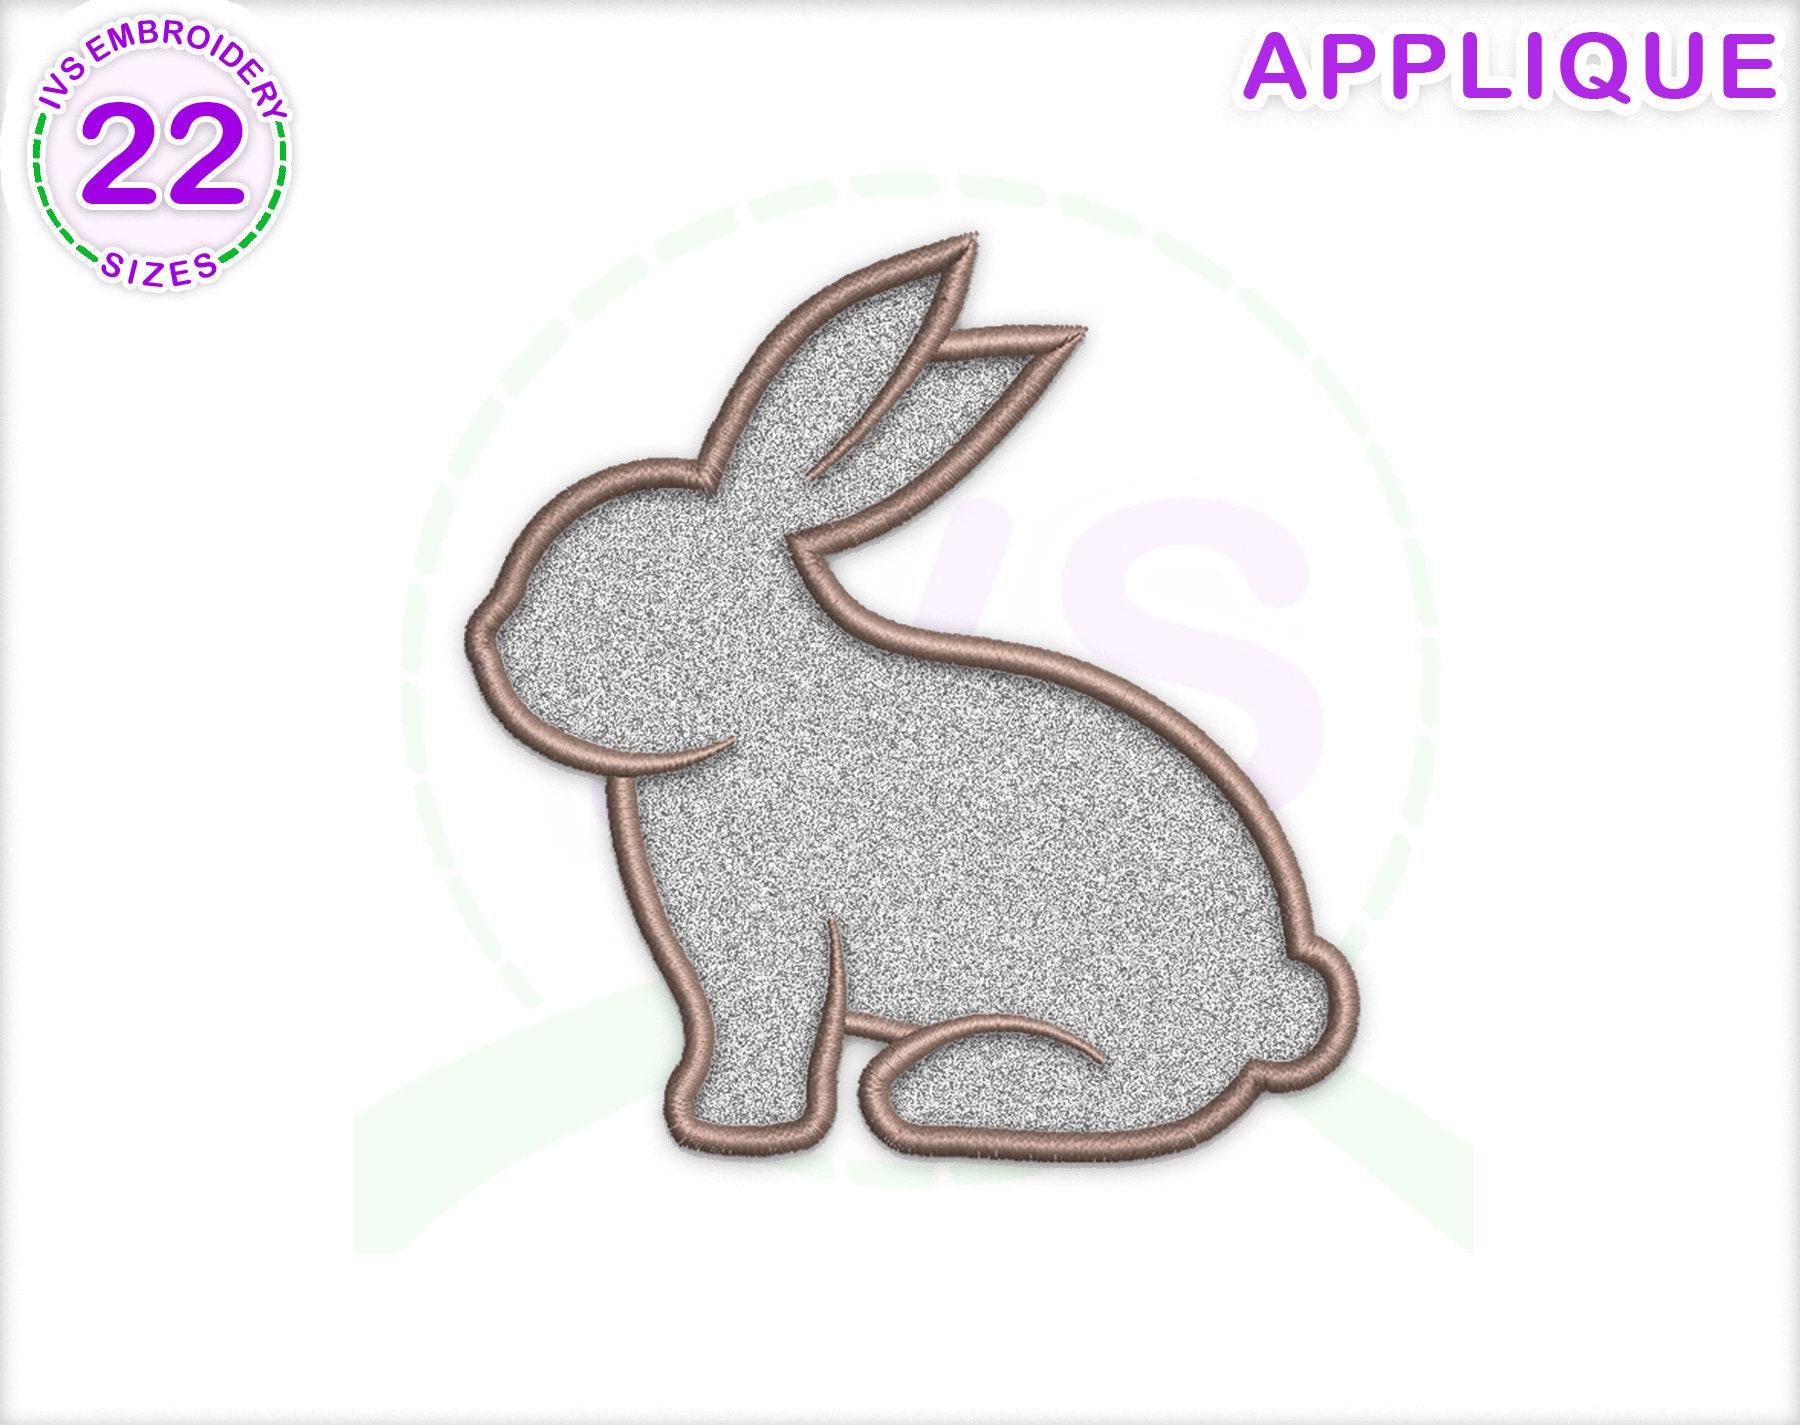 Bunny applique embroidery design rabbit machine embroidery | Etsy